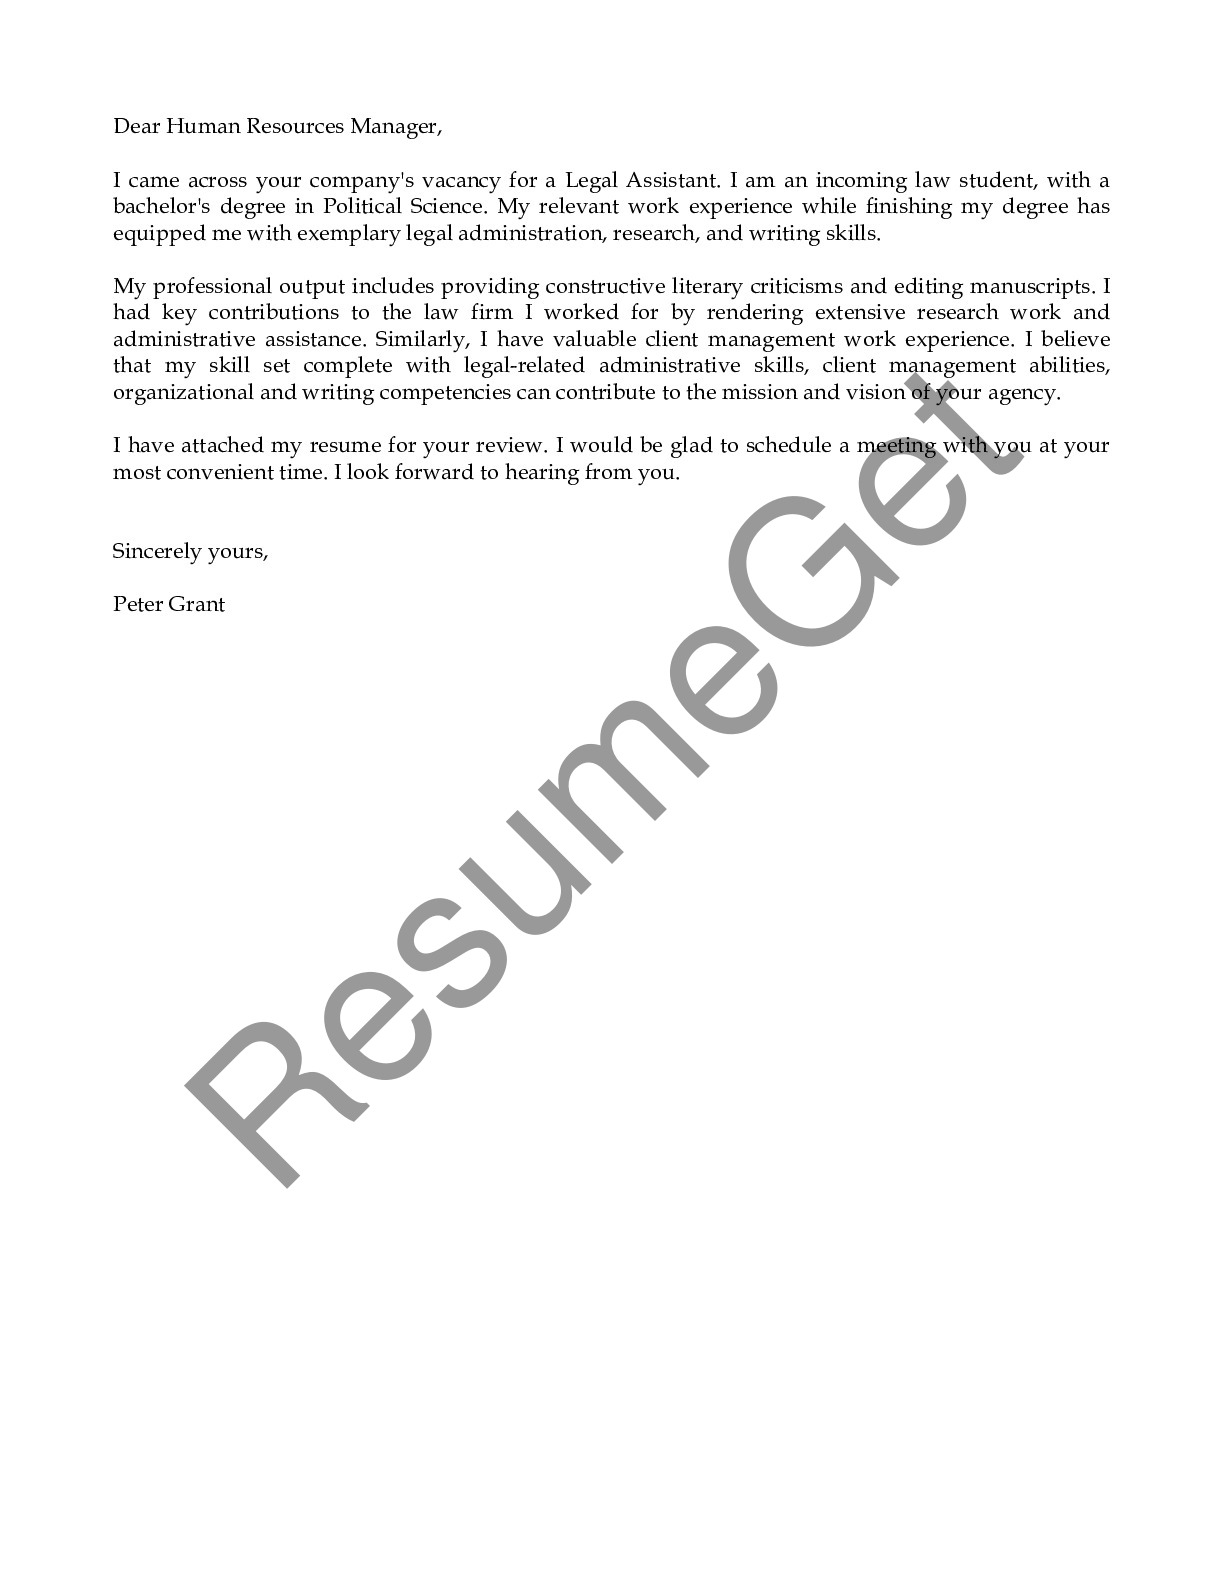 Cover Letter Example for Legal Assistant